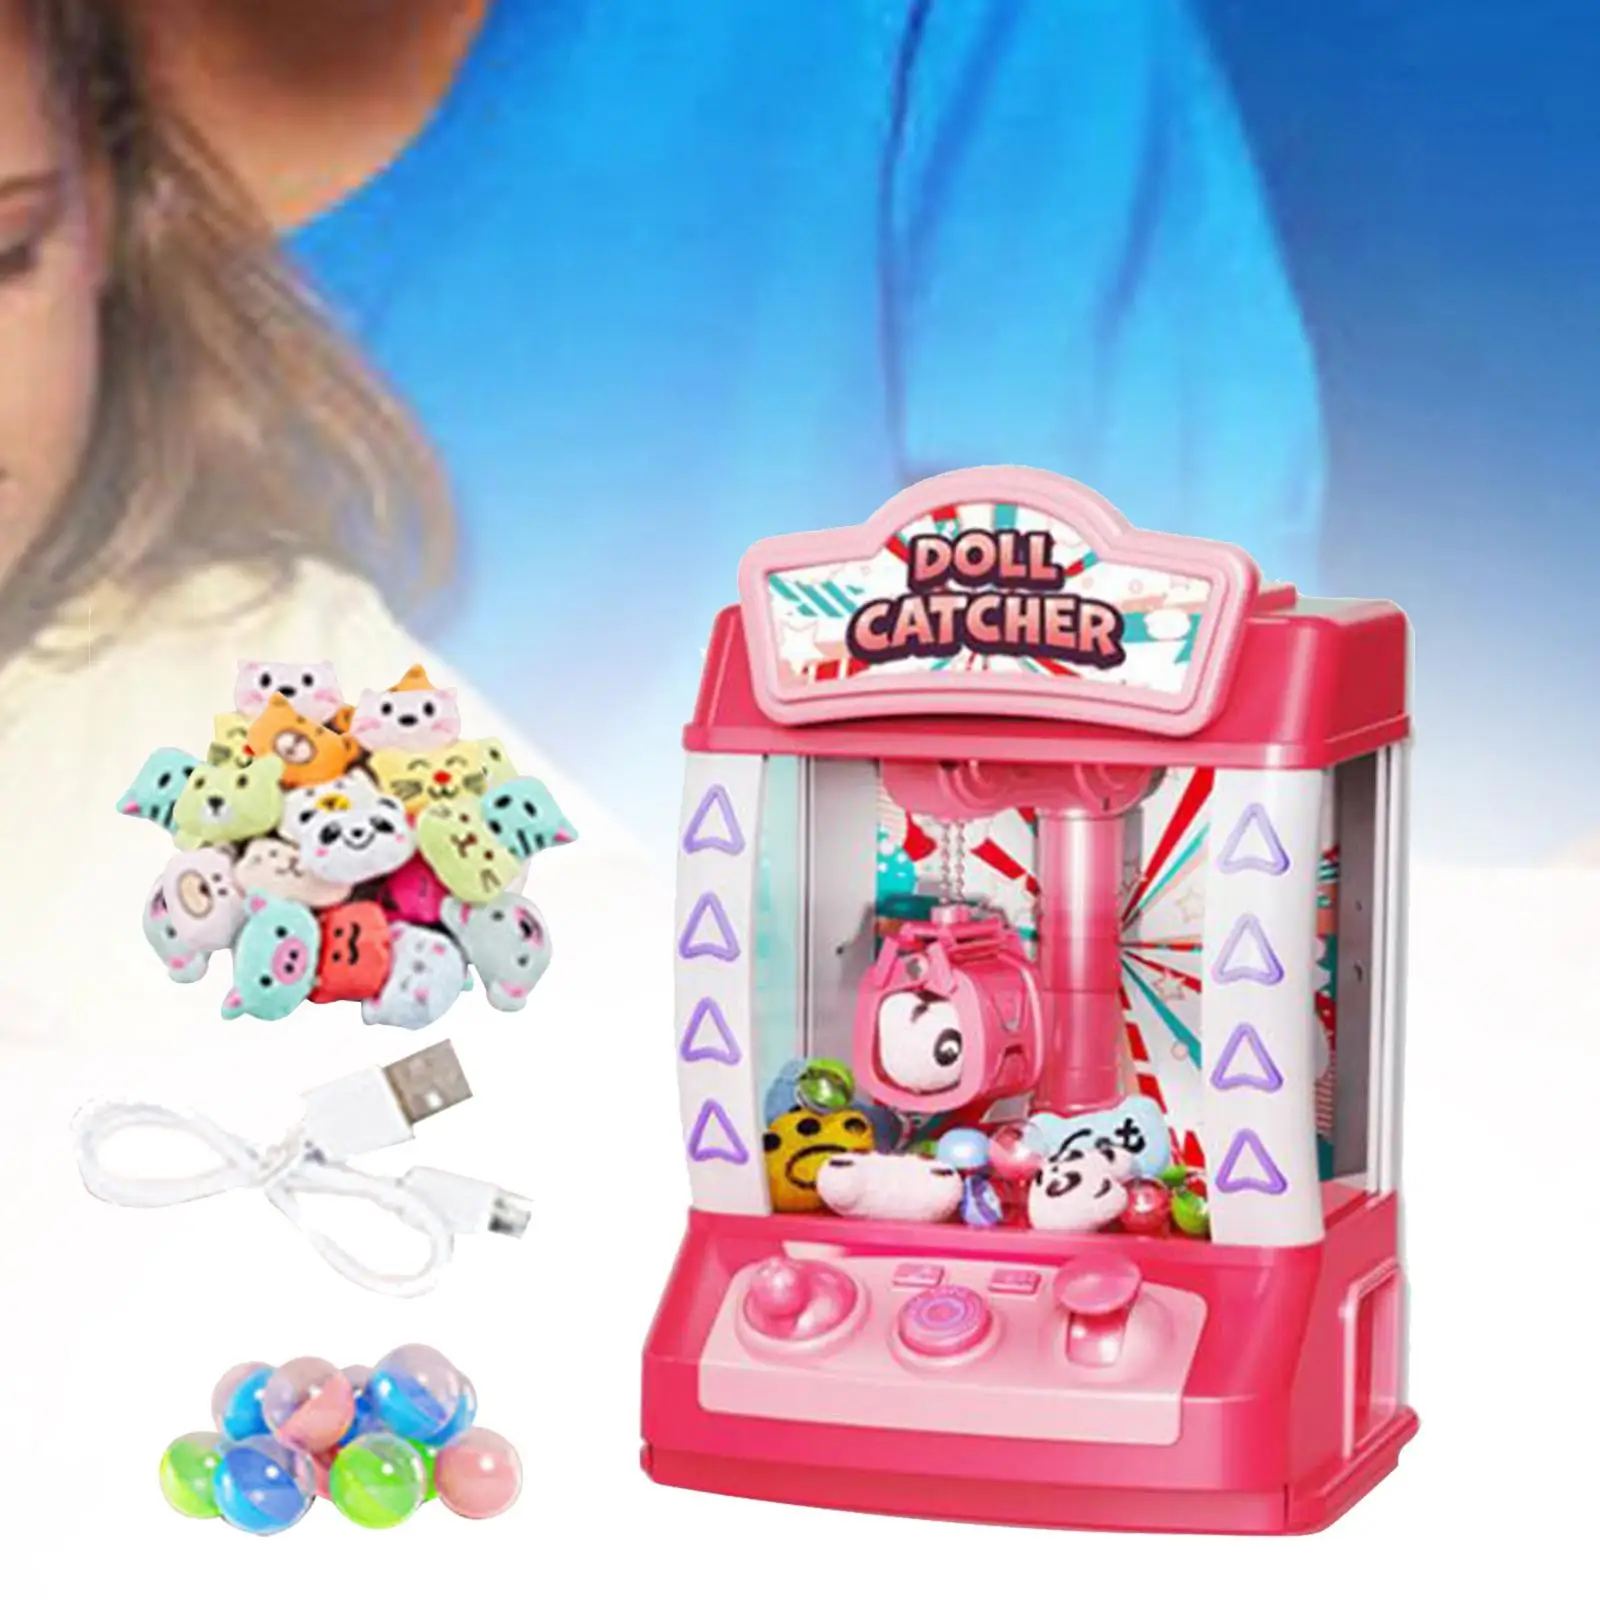 Claw Machine Candy Dispenser Toys, Mini Vending Machine, Arcade Candy Capsule Claw Game Prizes Toy for Toddlers, Adults